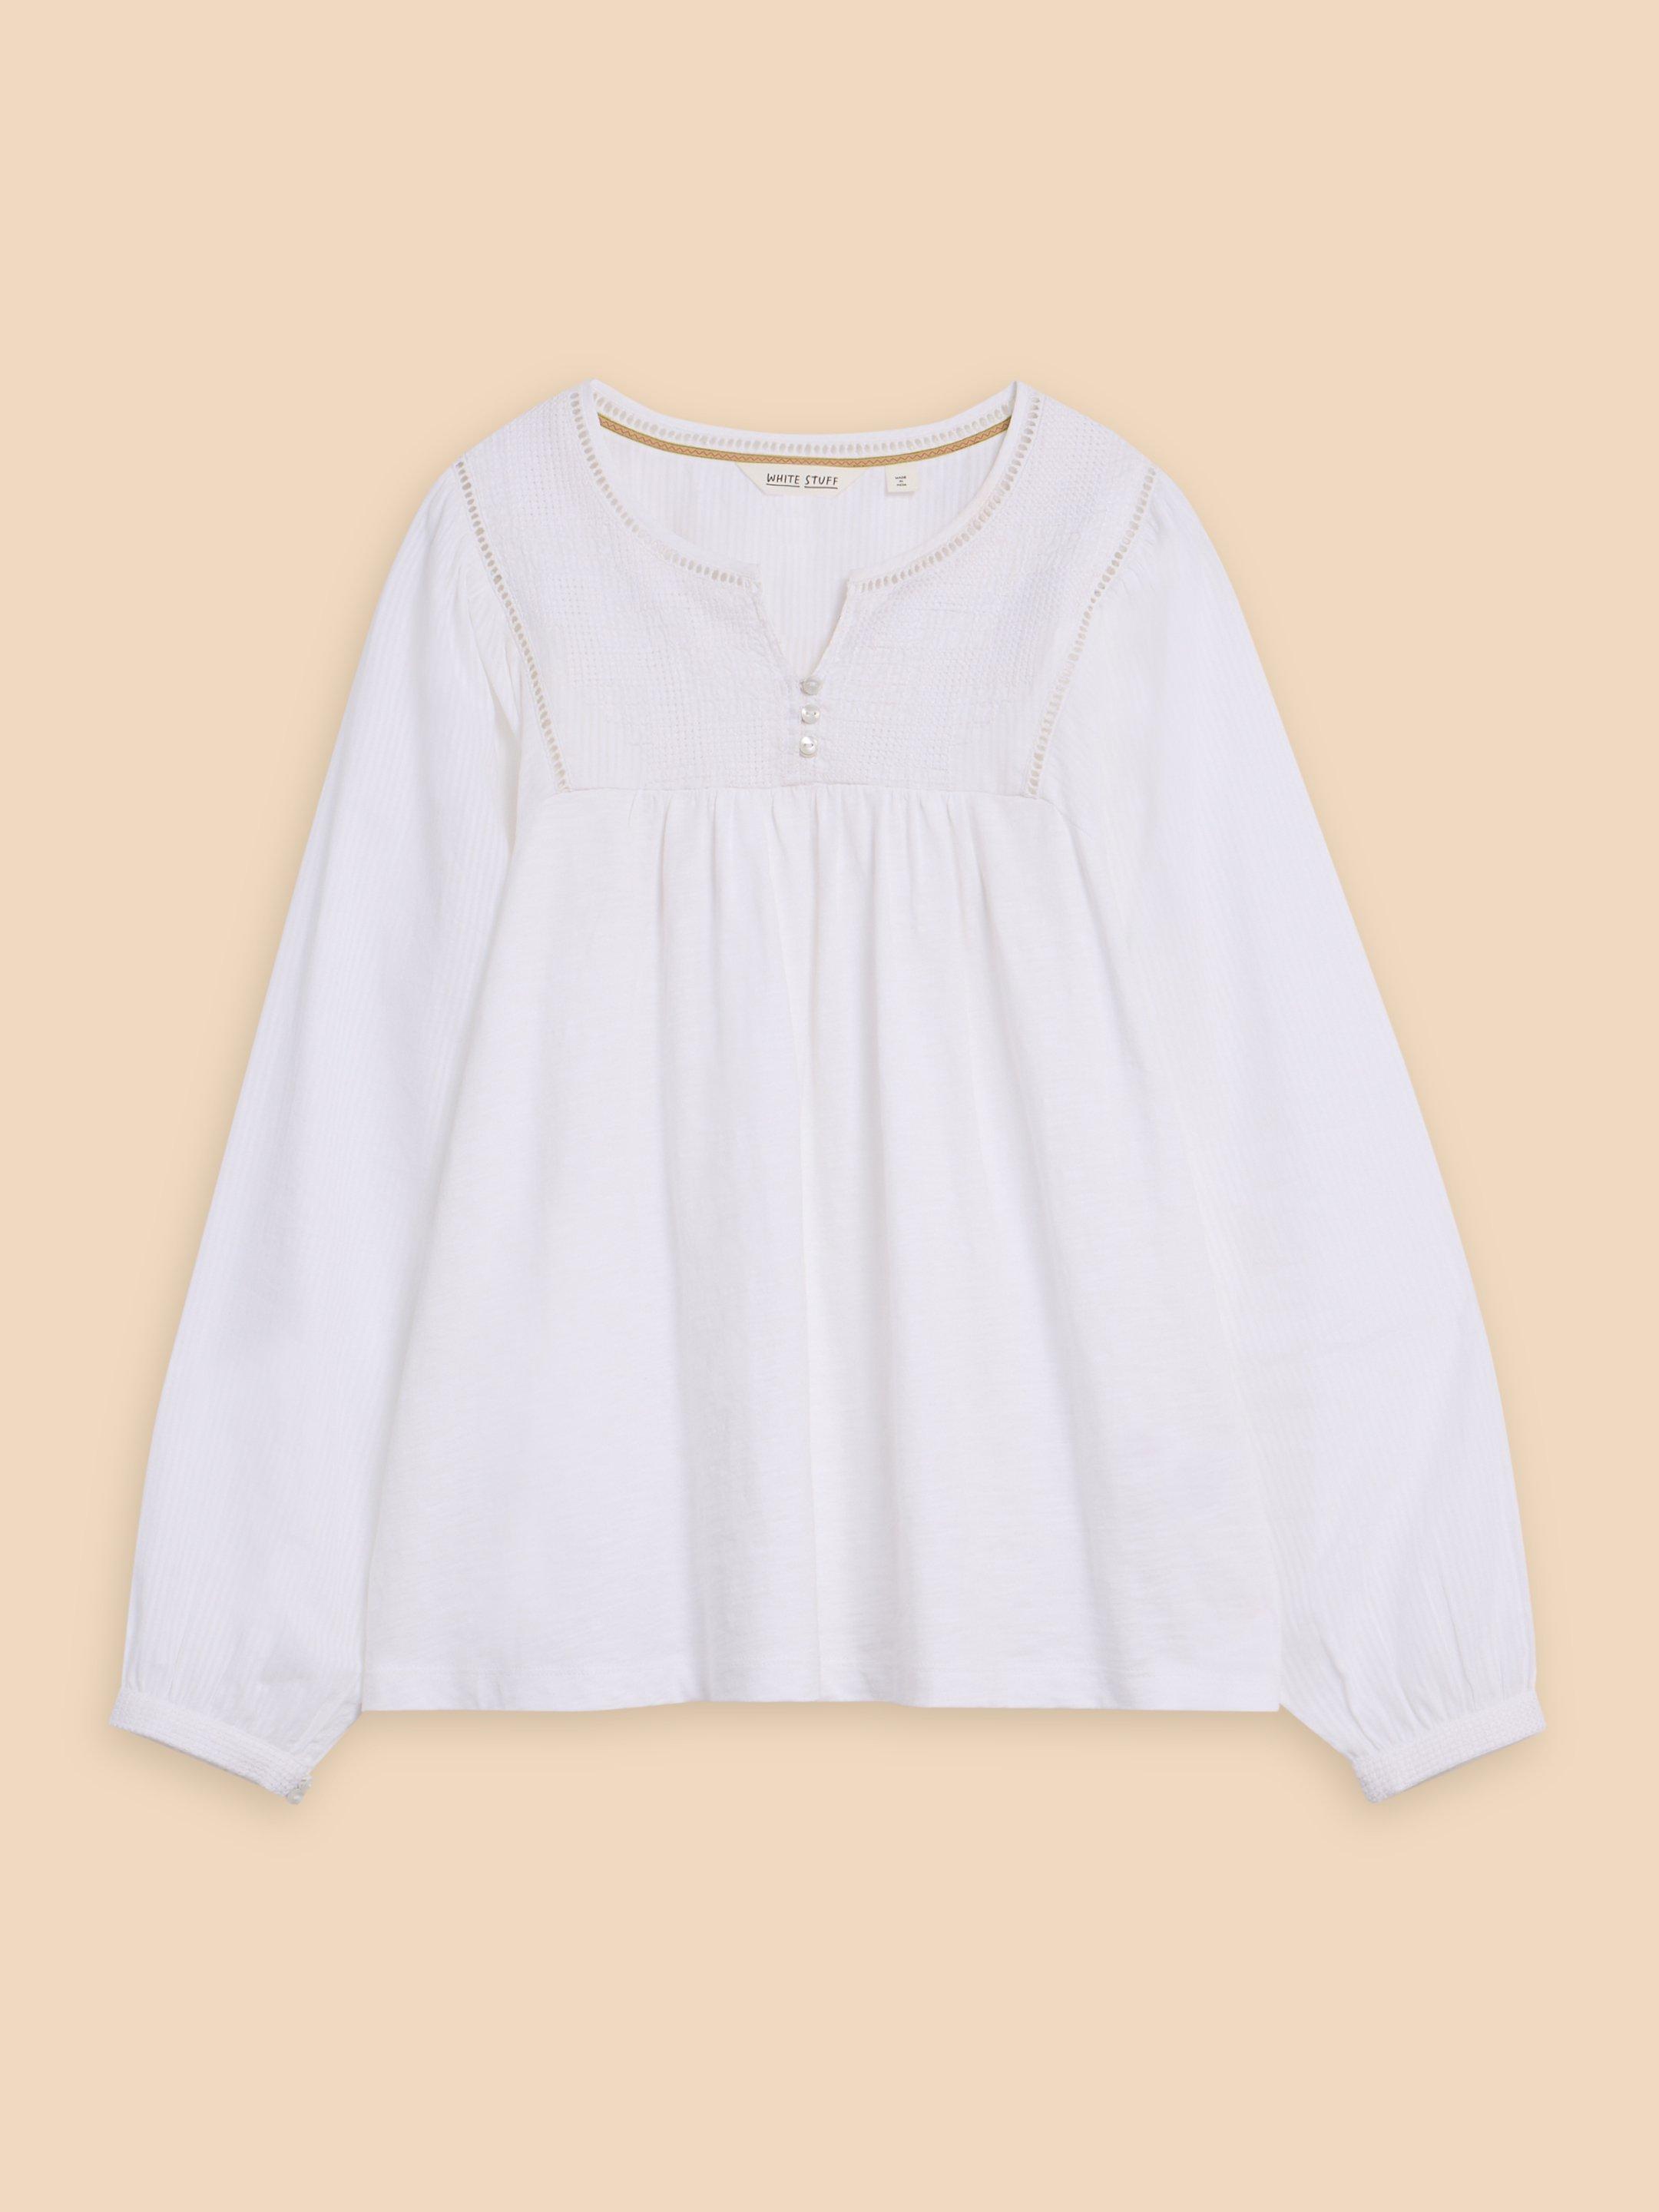 ESME MIX TOP in BRIL WHITE - FLAT FRONT